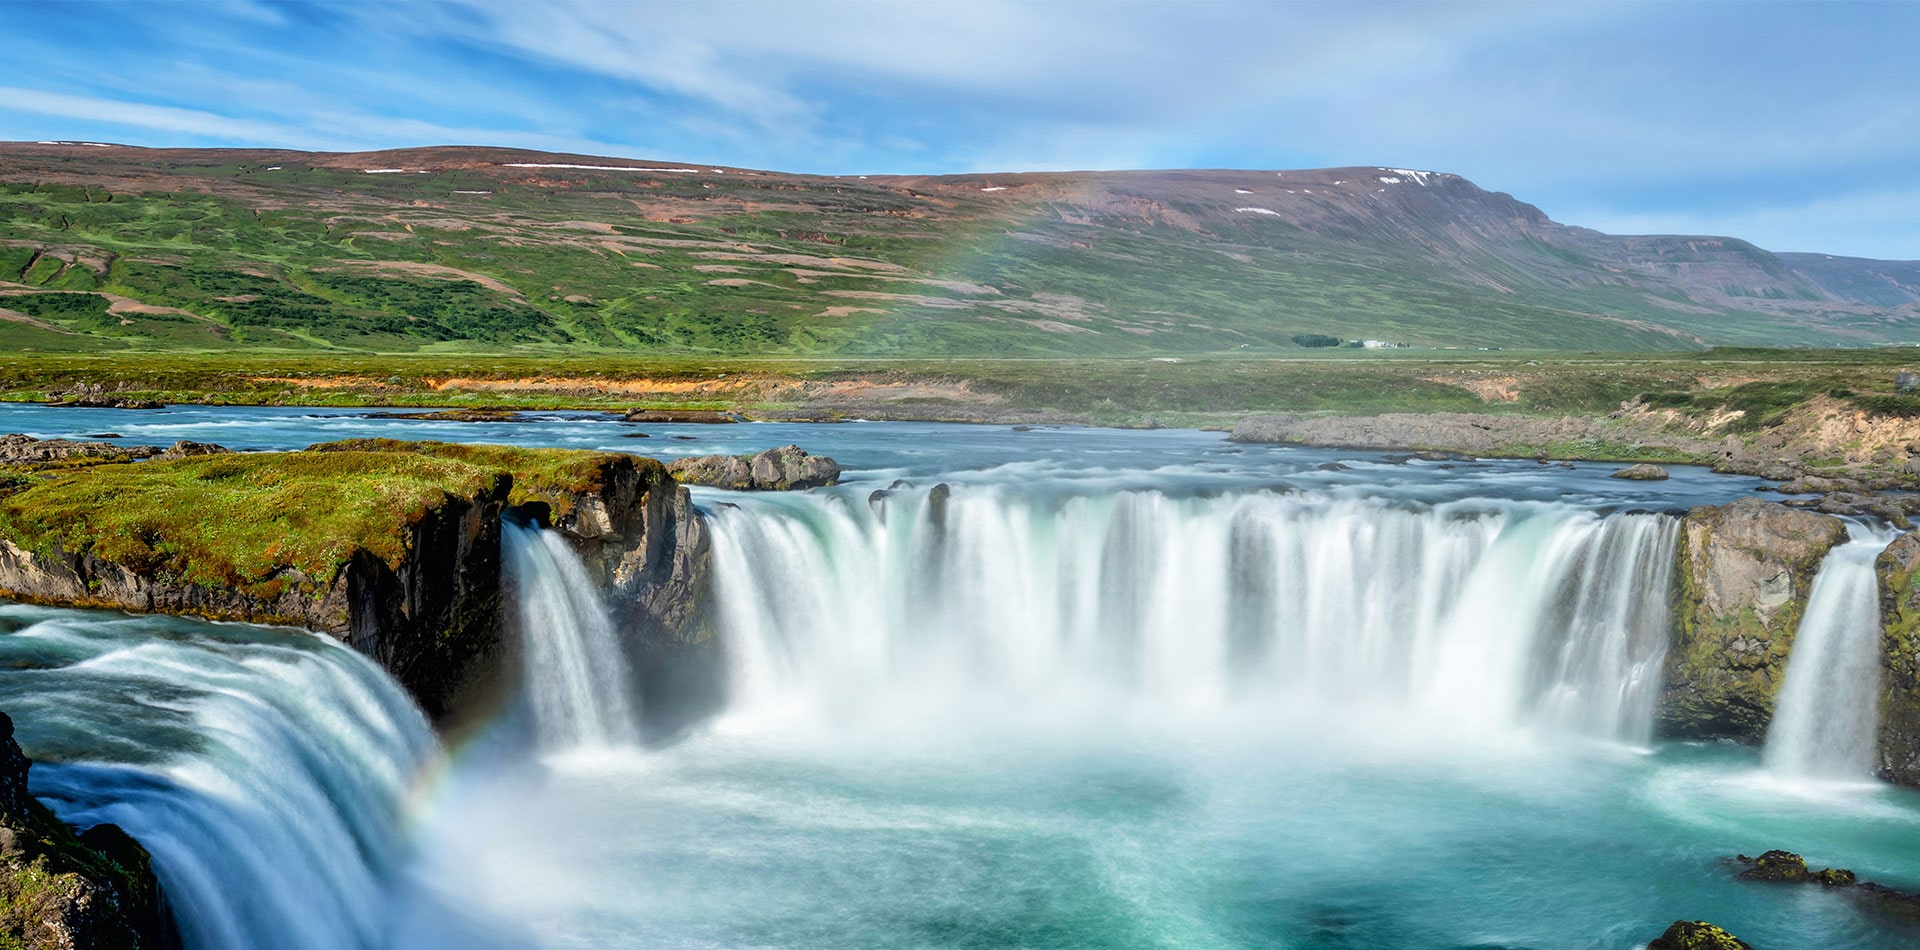 Spectacular views of the Godafoss waterfall, Iceland